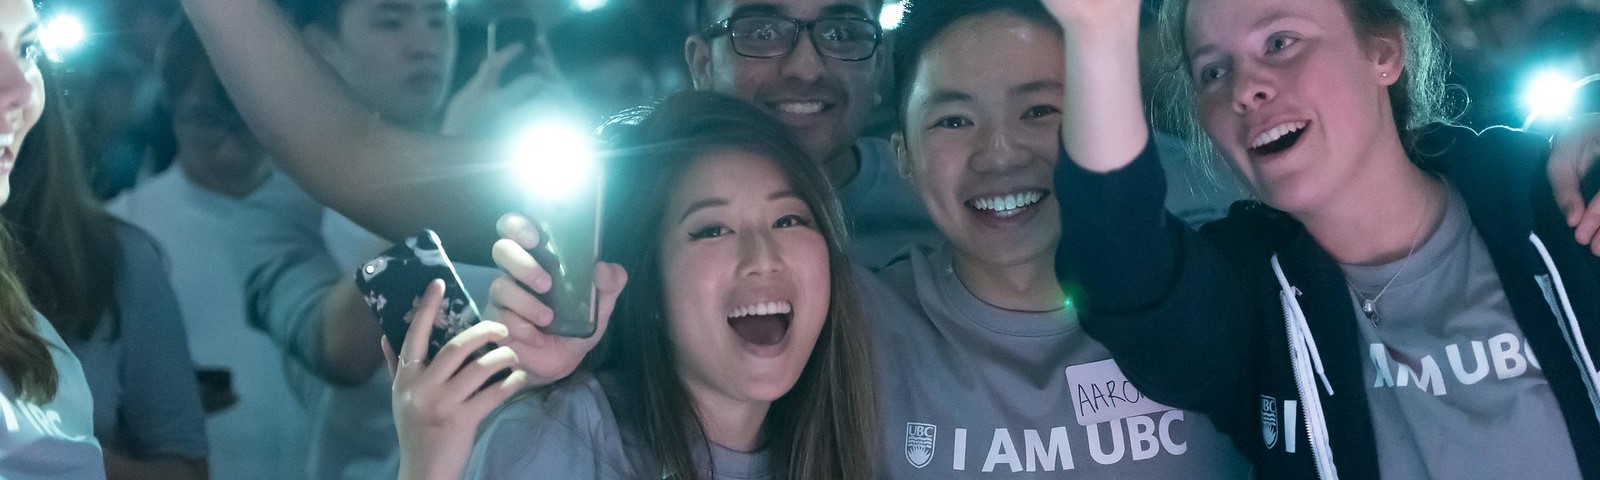 Students in matching "I am UBC" shirts cheering and using phone flashlights as celebratory communal lights